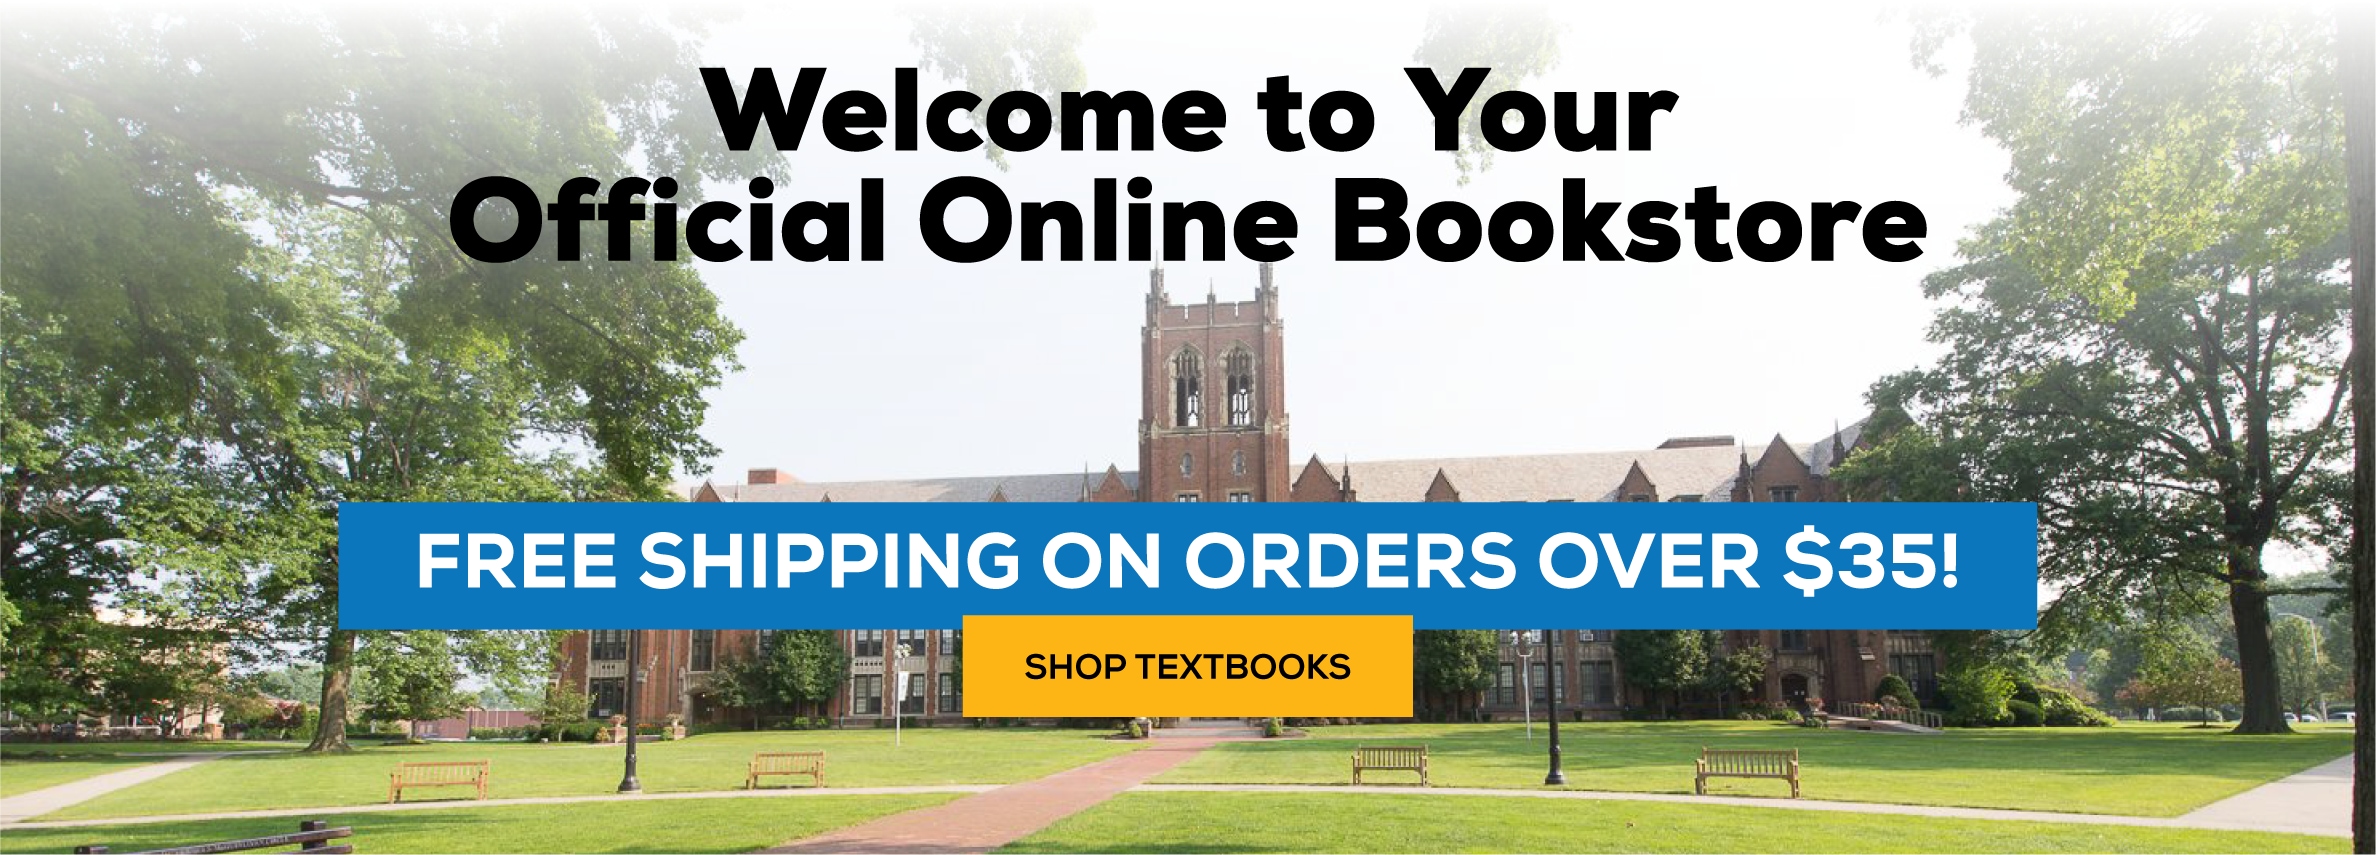 Welcome to your official online bookstore. Free shipping on orders over $35! Shop textbooks.